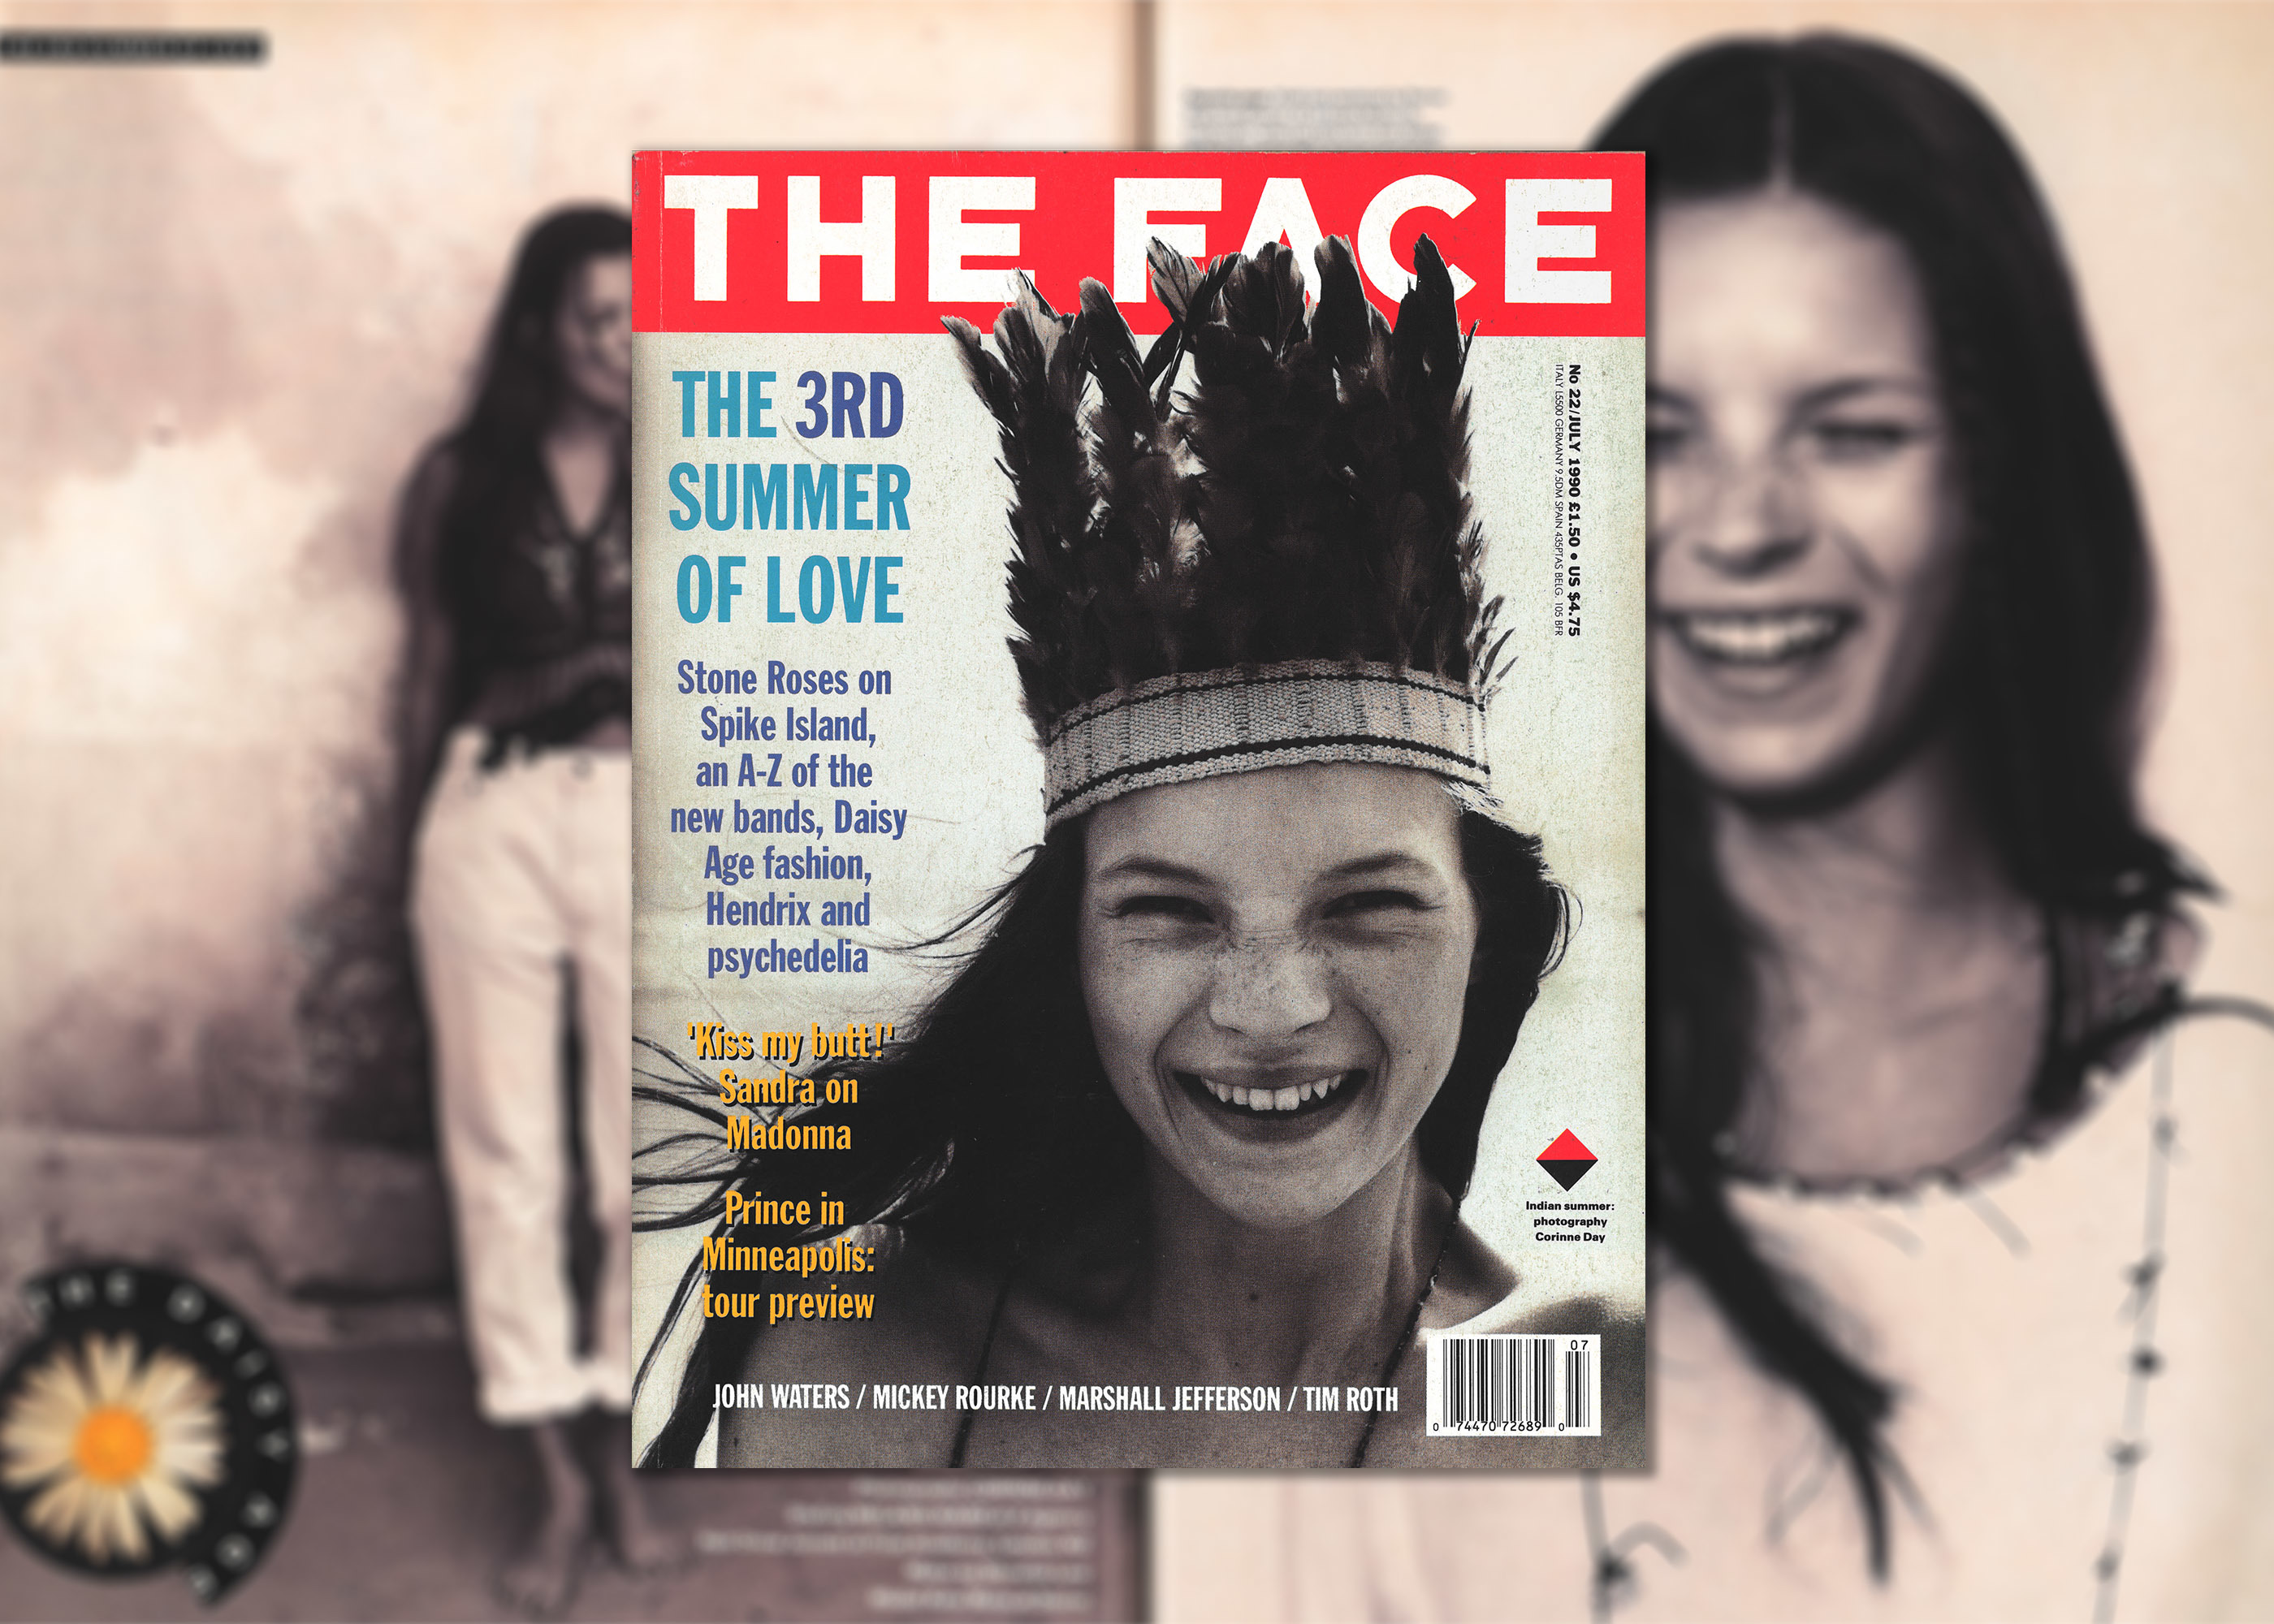 The 3rd Summer of Love - The Face